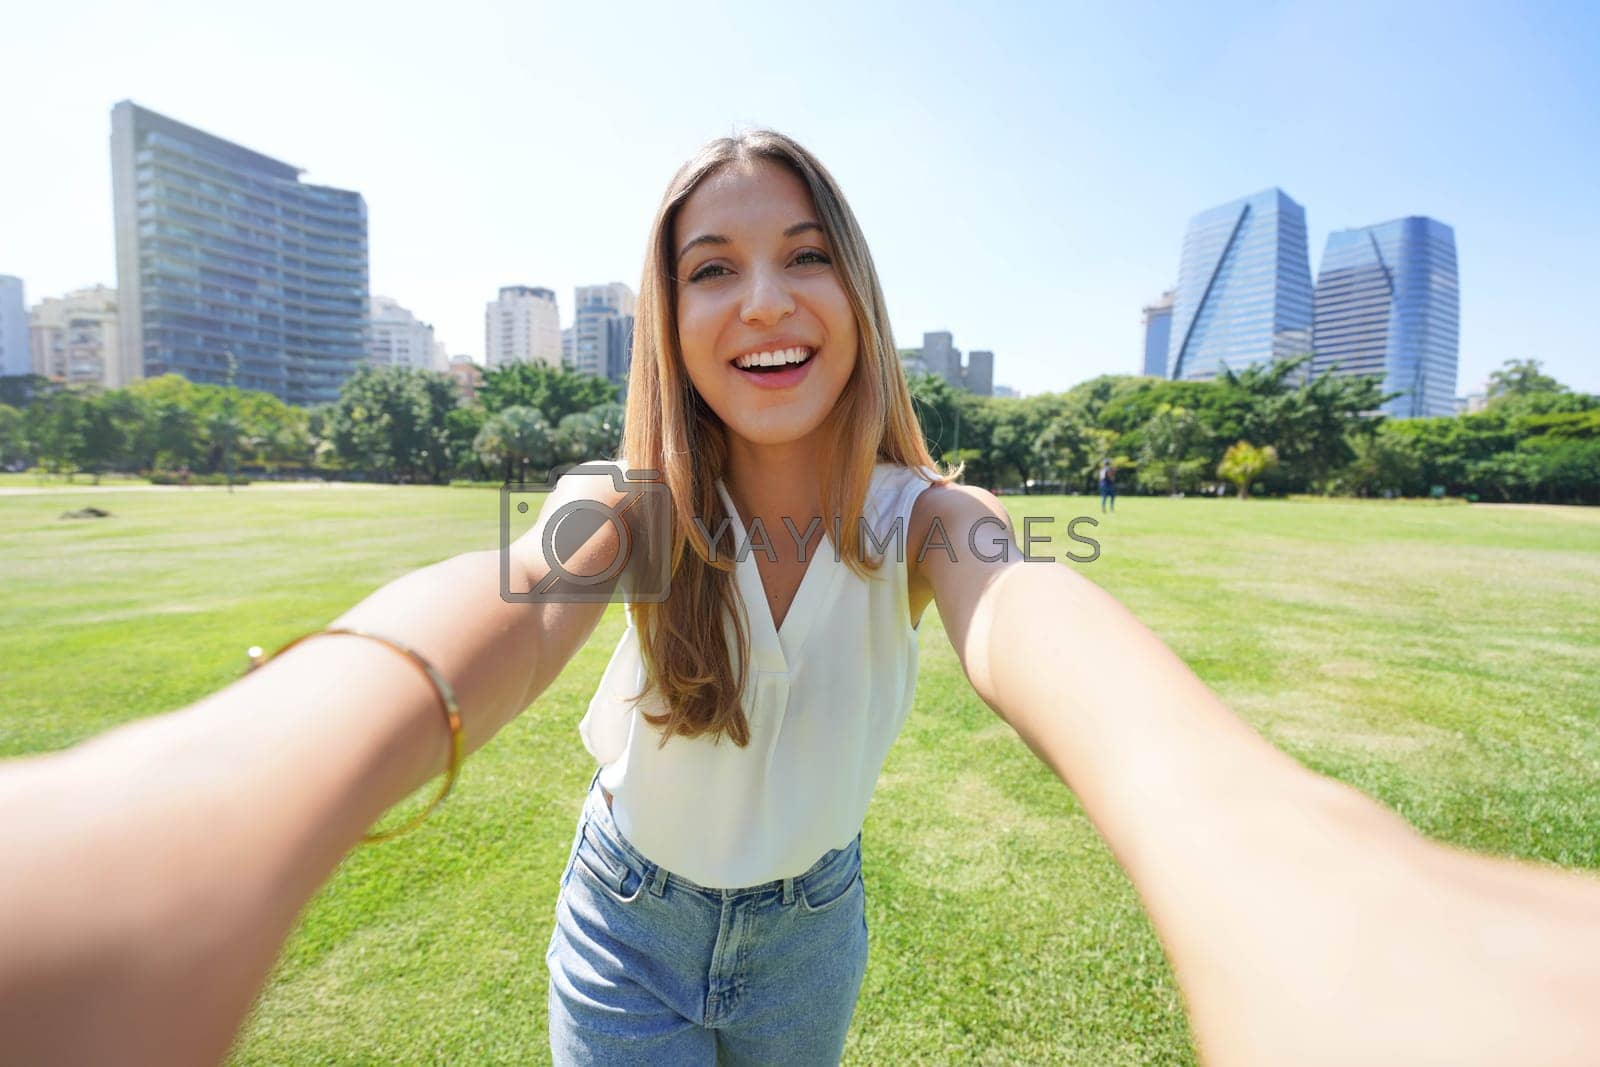 Royalty free image of Beautiful smiling girl takes self portrait in Sao Paulo, Brazil by sergio_monti